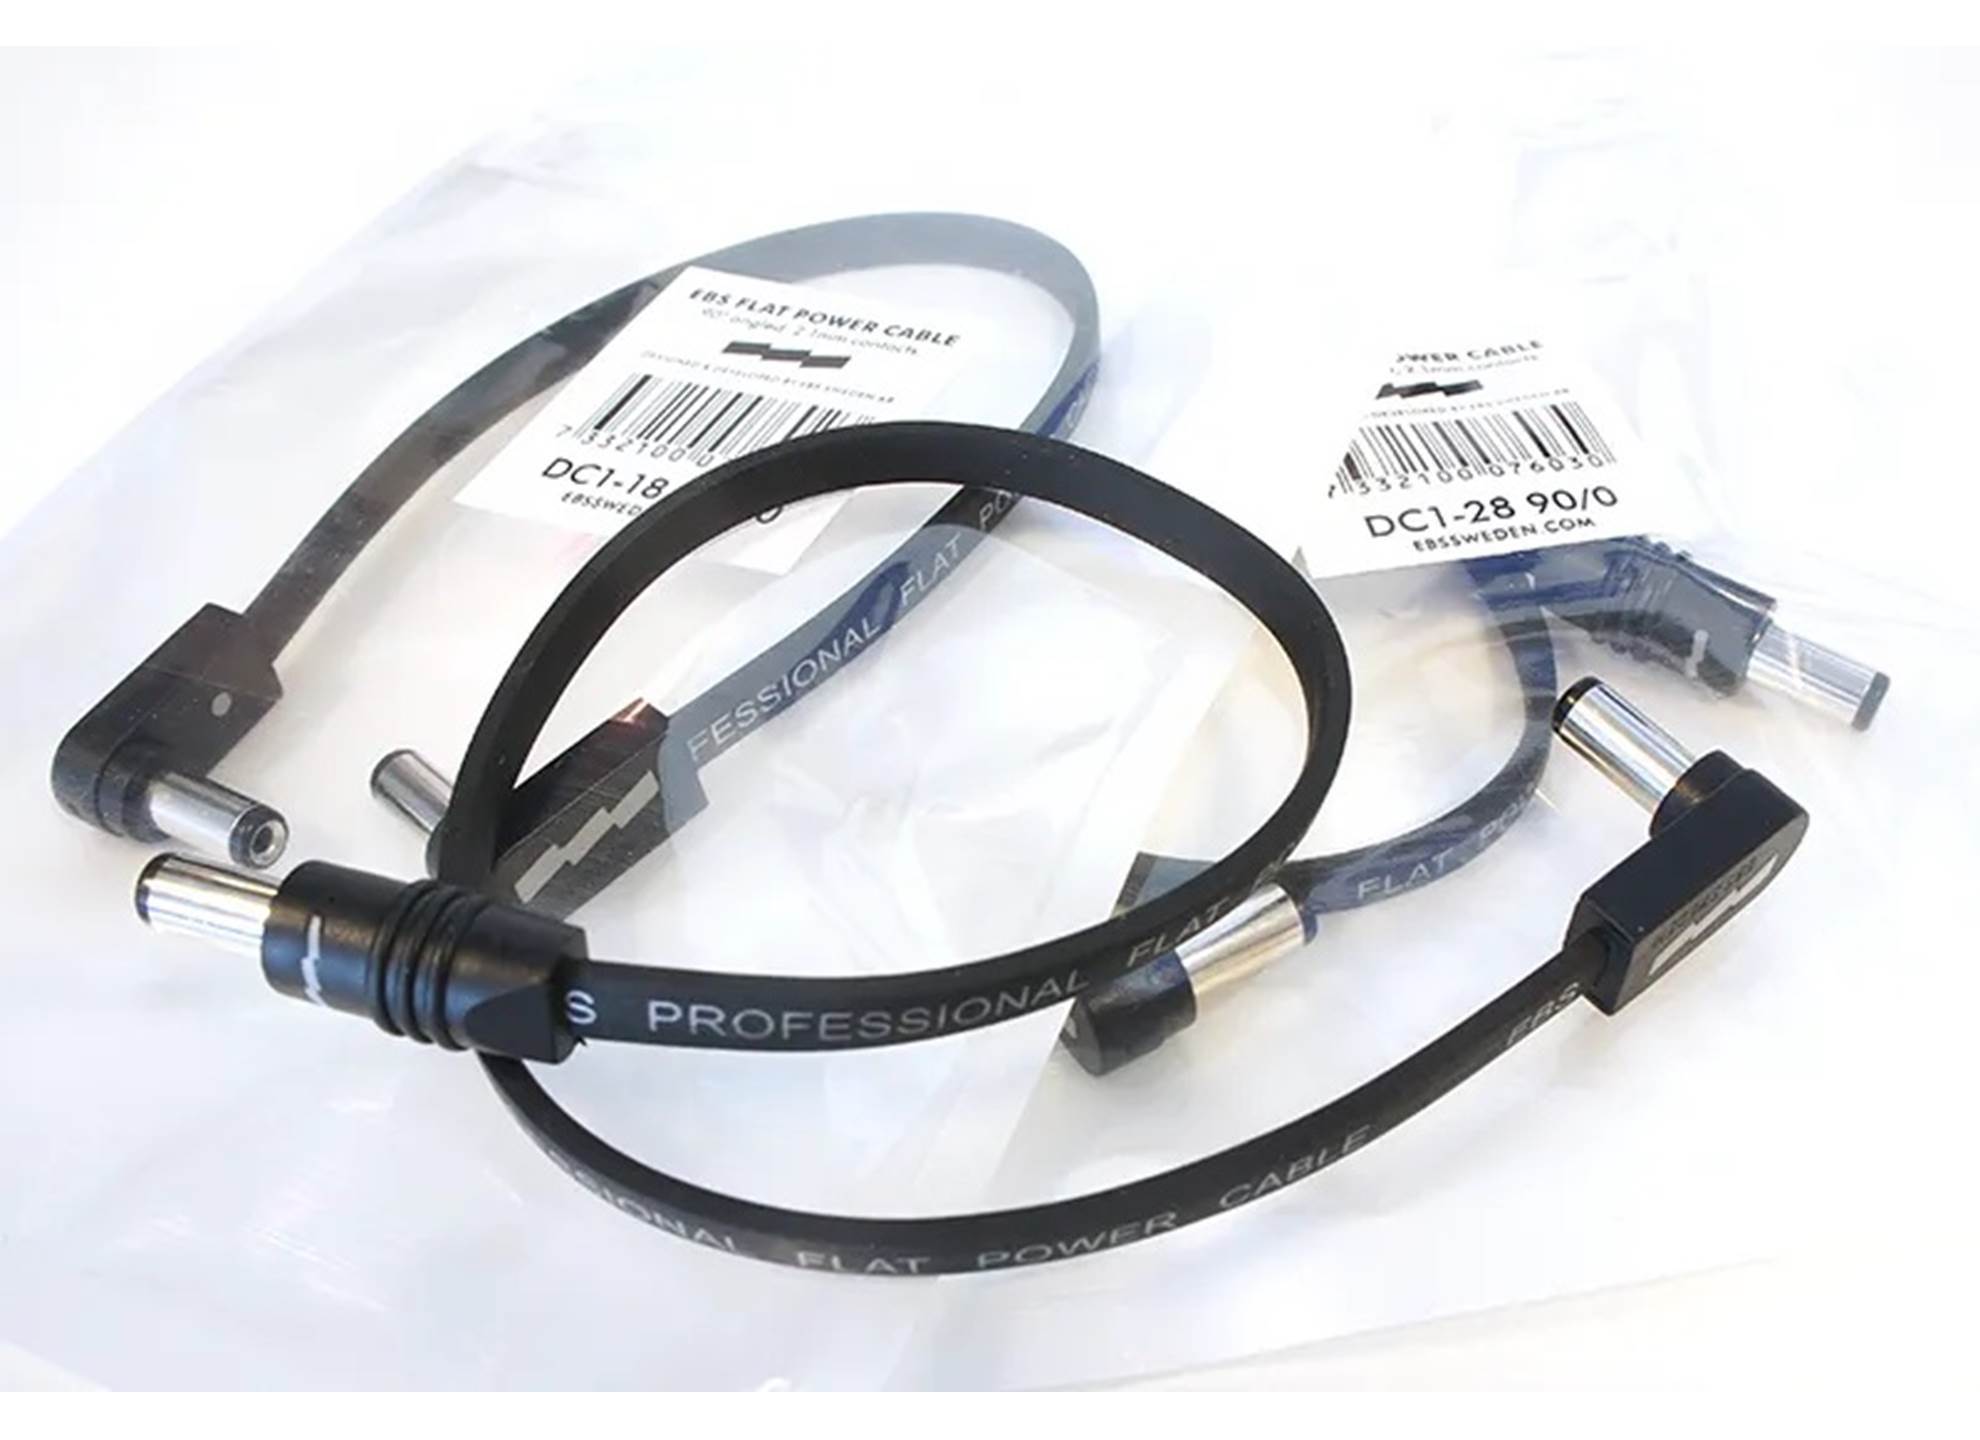 DC1-28 90/90 Flat Power Cable 28 cm